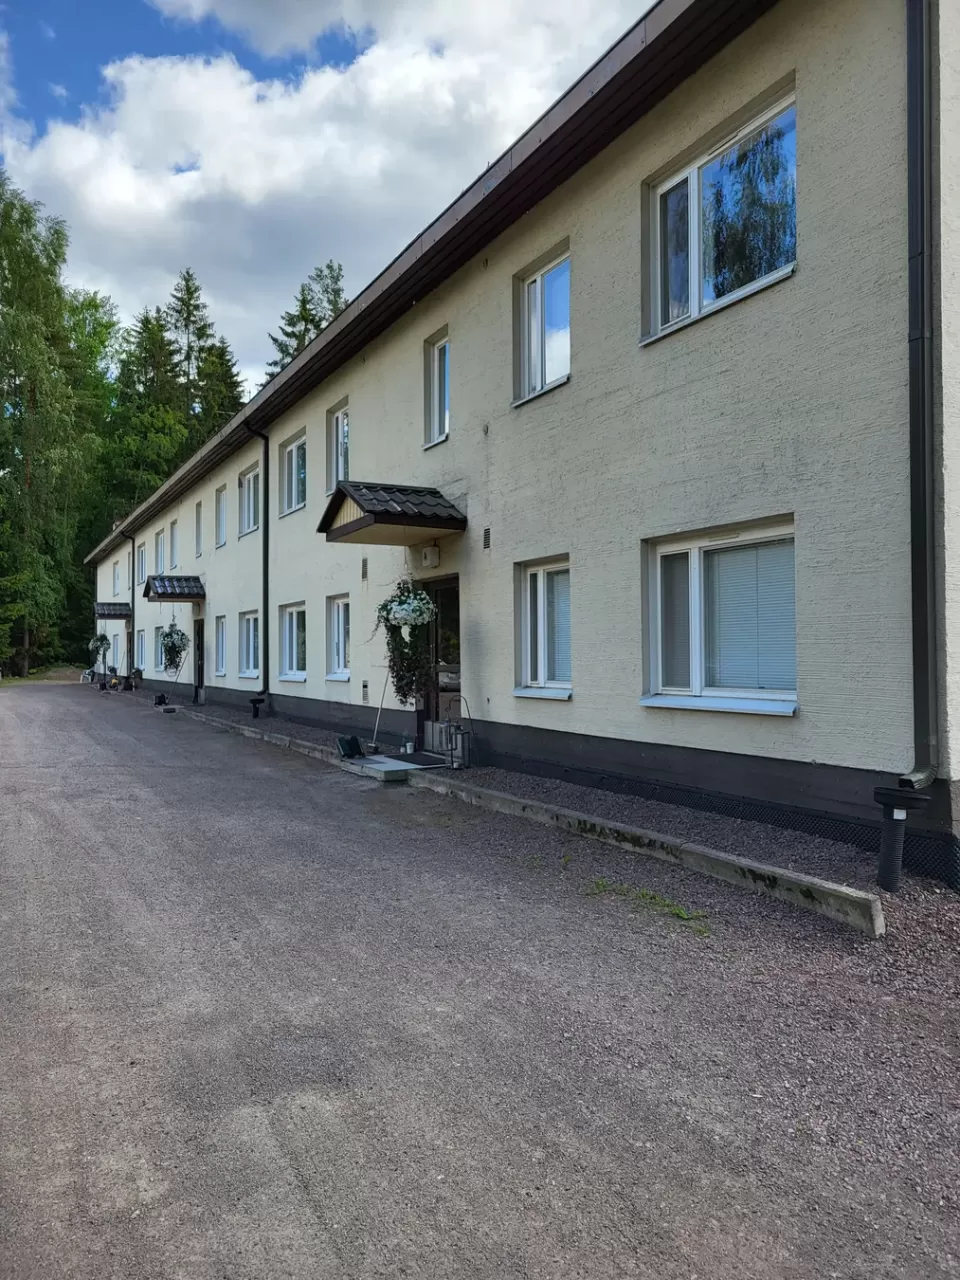 Flat in Kotka, Finland, 51.5 sq.m - picture 1